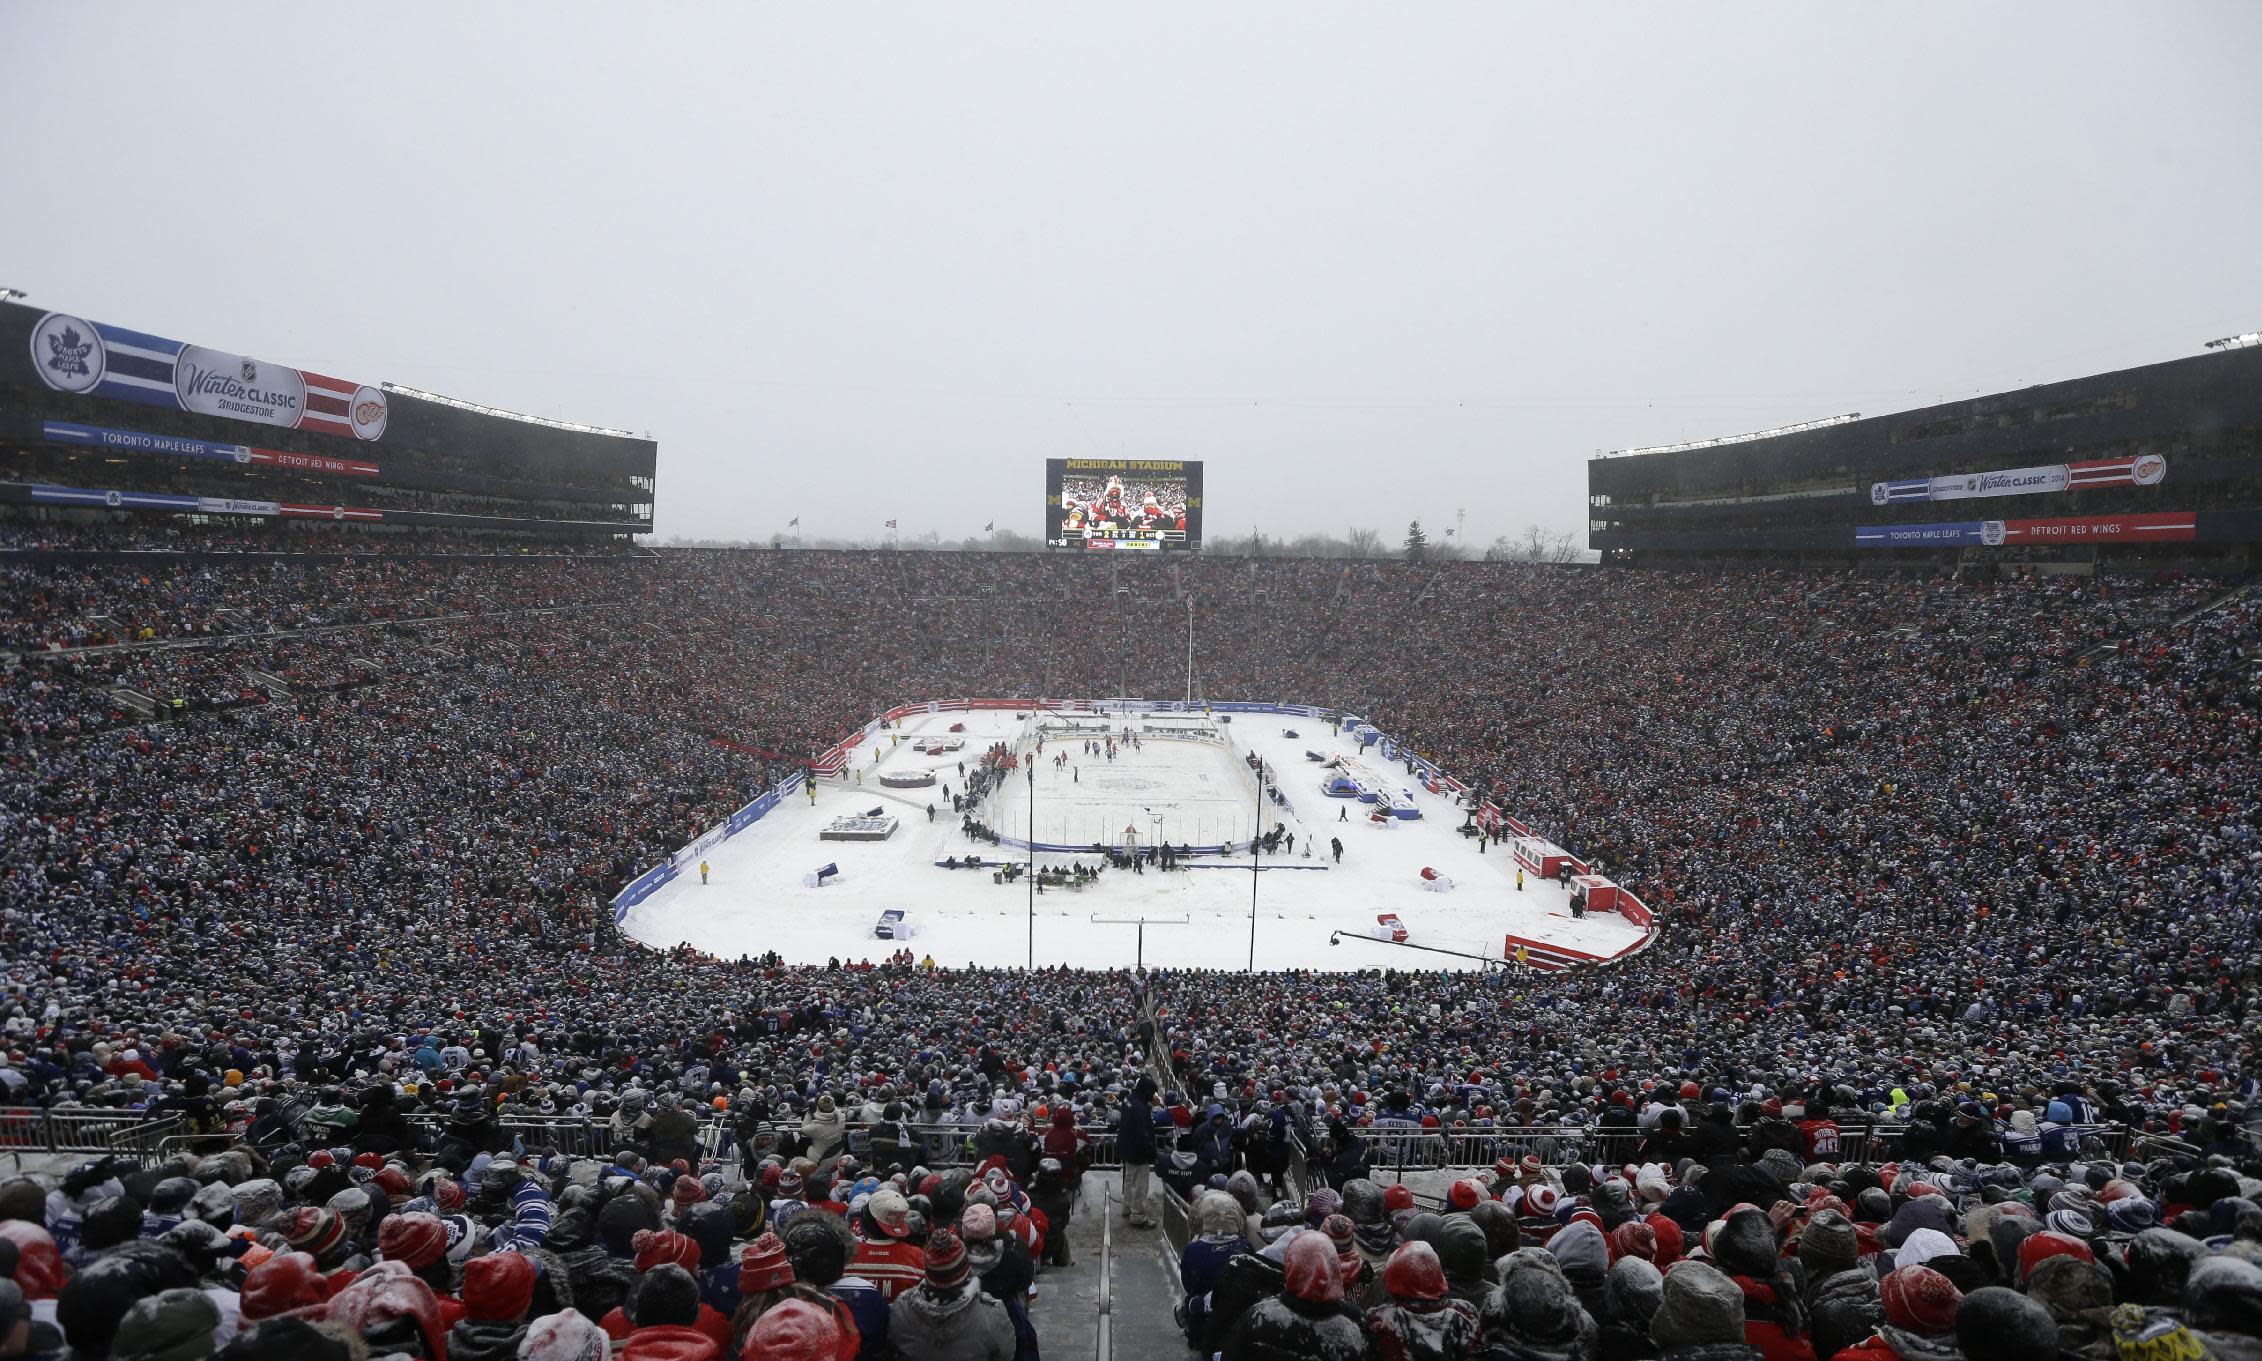 outdoor nhl hockey game